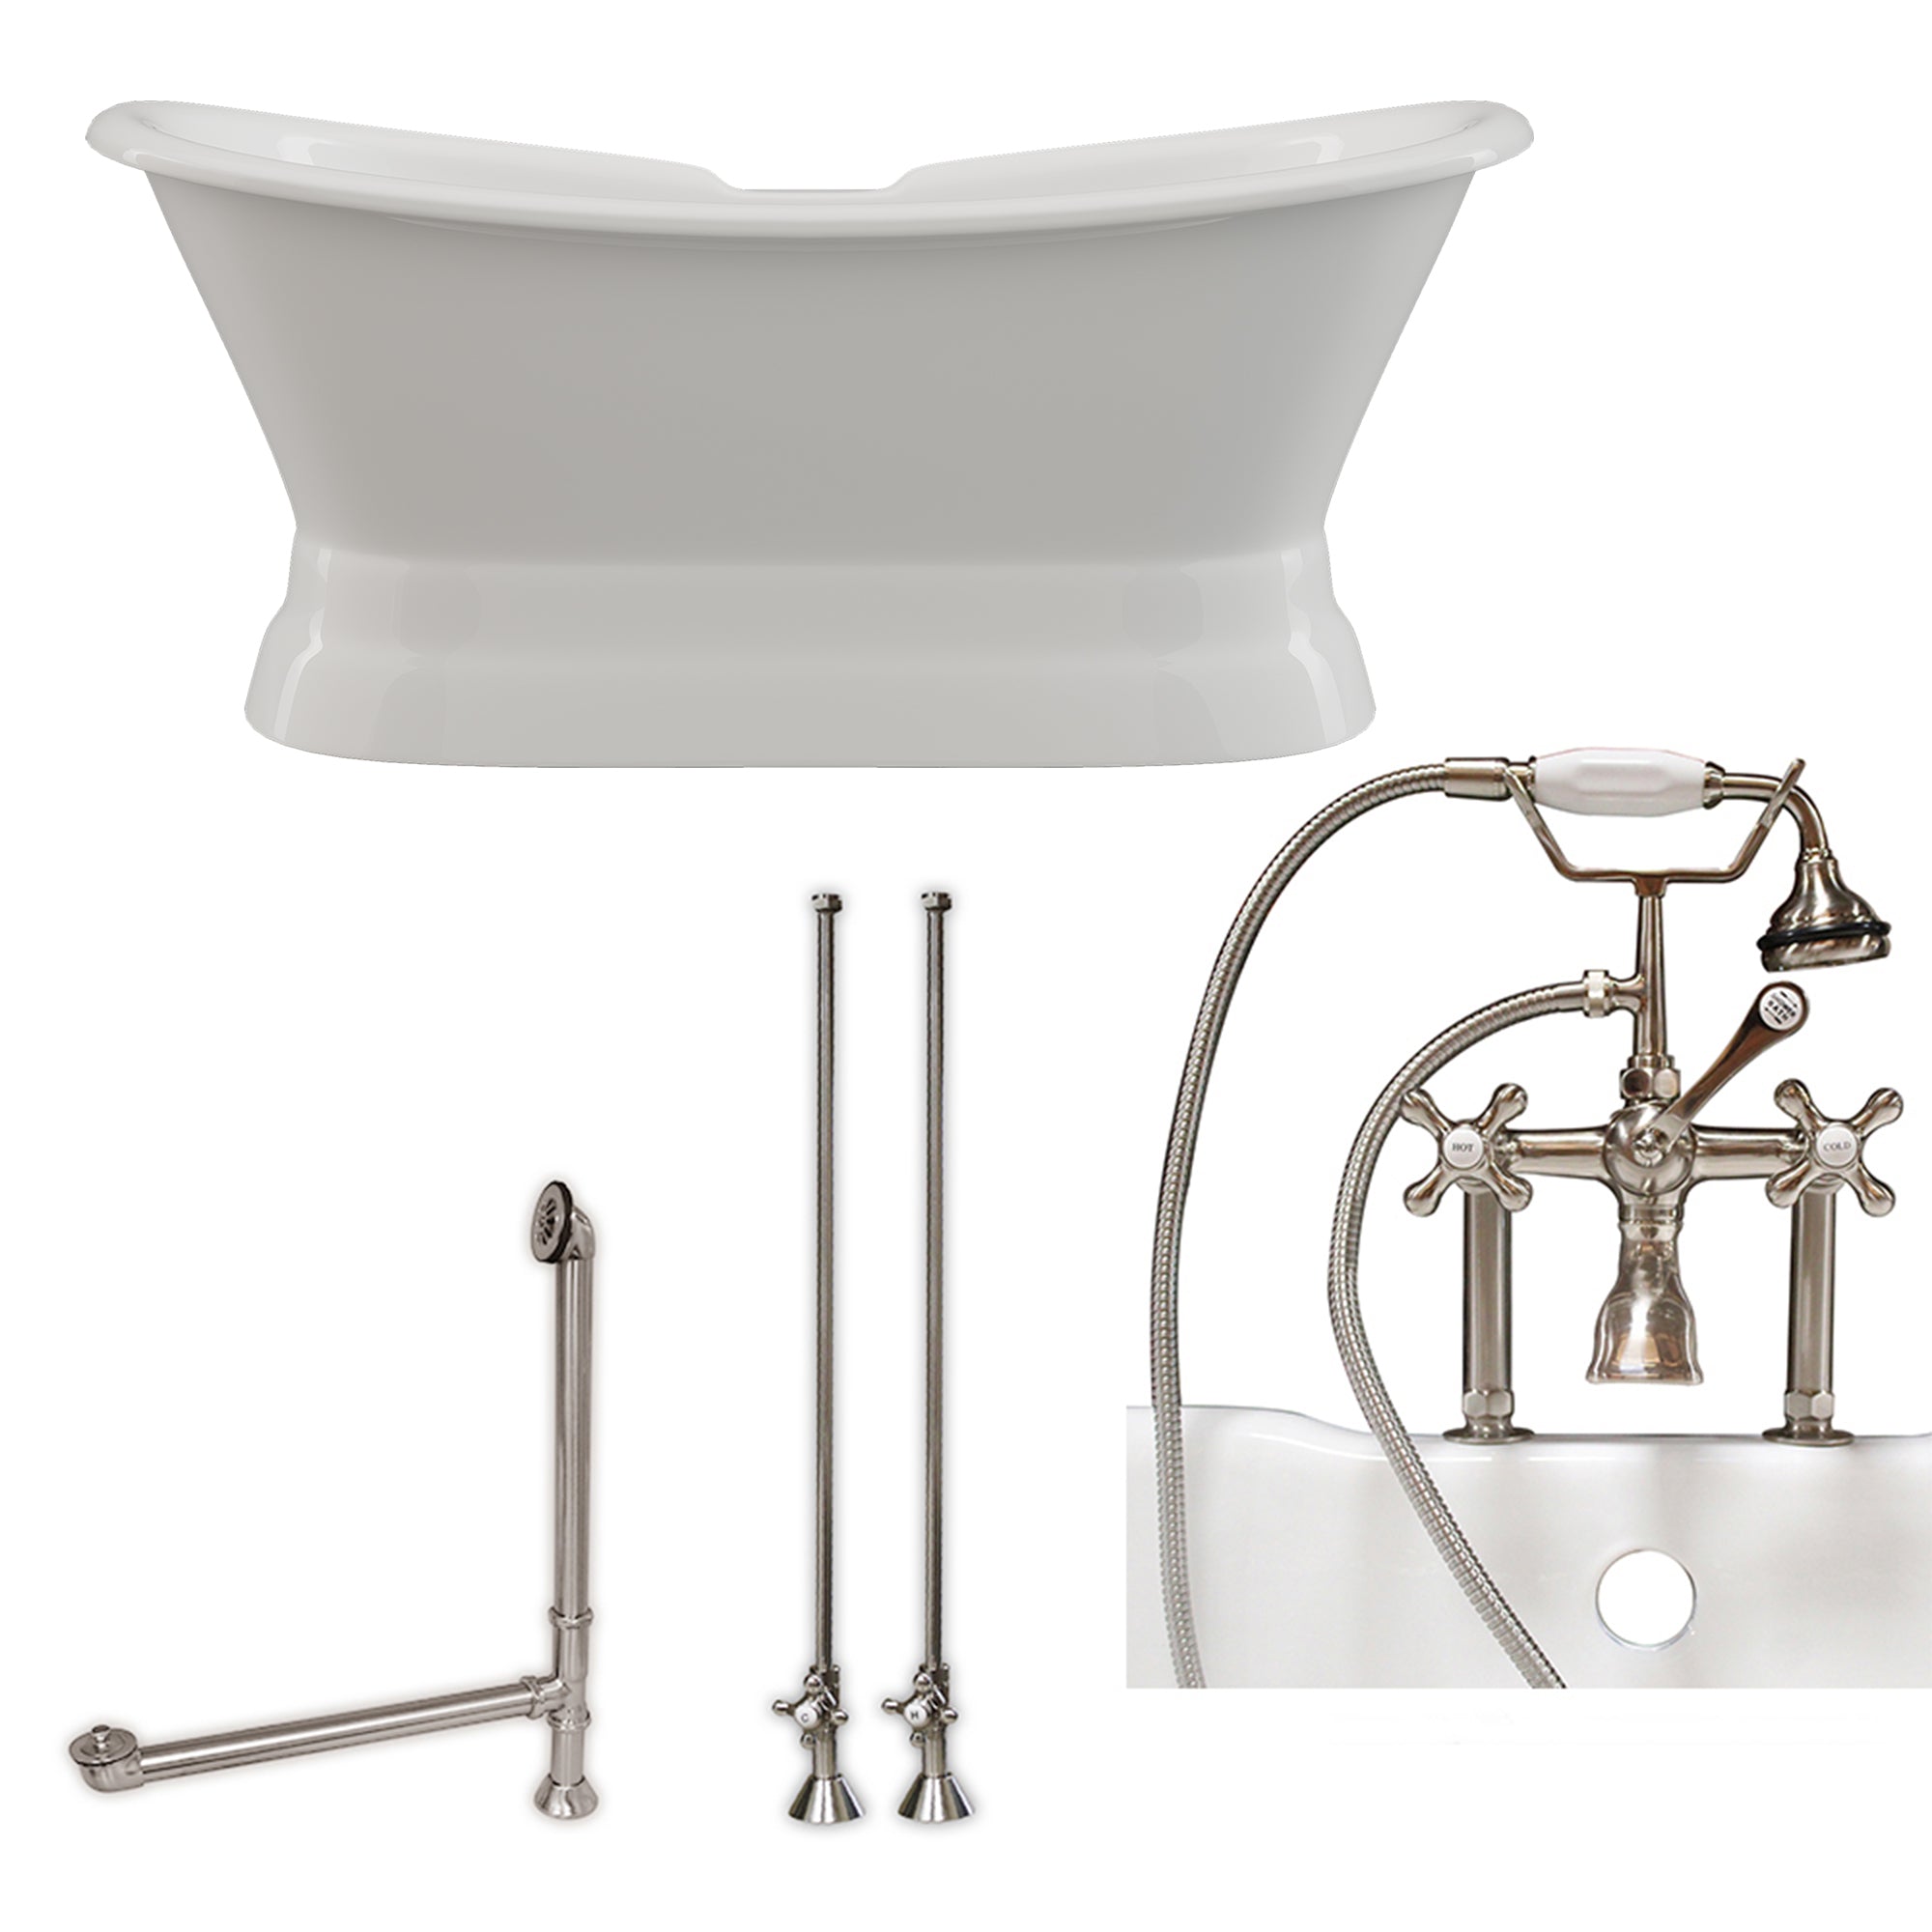 Cambridge Plumbing Double Slipper Cast Iron Pedestal Soaking Tub (Porcelain interior and white paint exterior) and Deck Mount Plumbing Package (Brushed nickel) DES-PED-463D-6-PKG-7DH - Vital Hydrotherapy